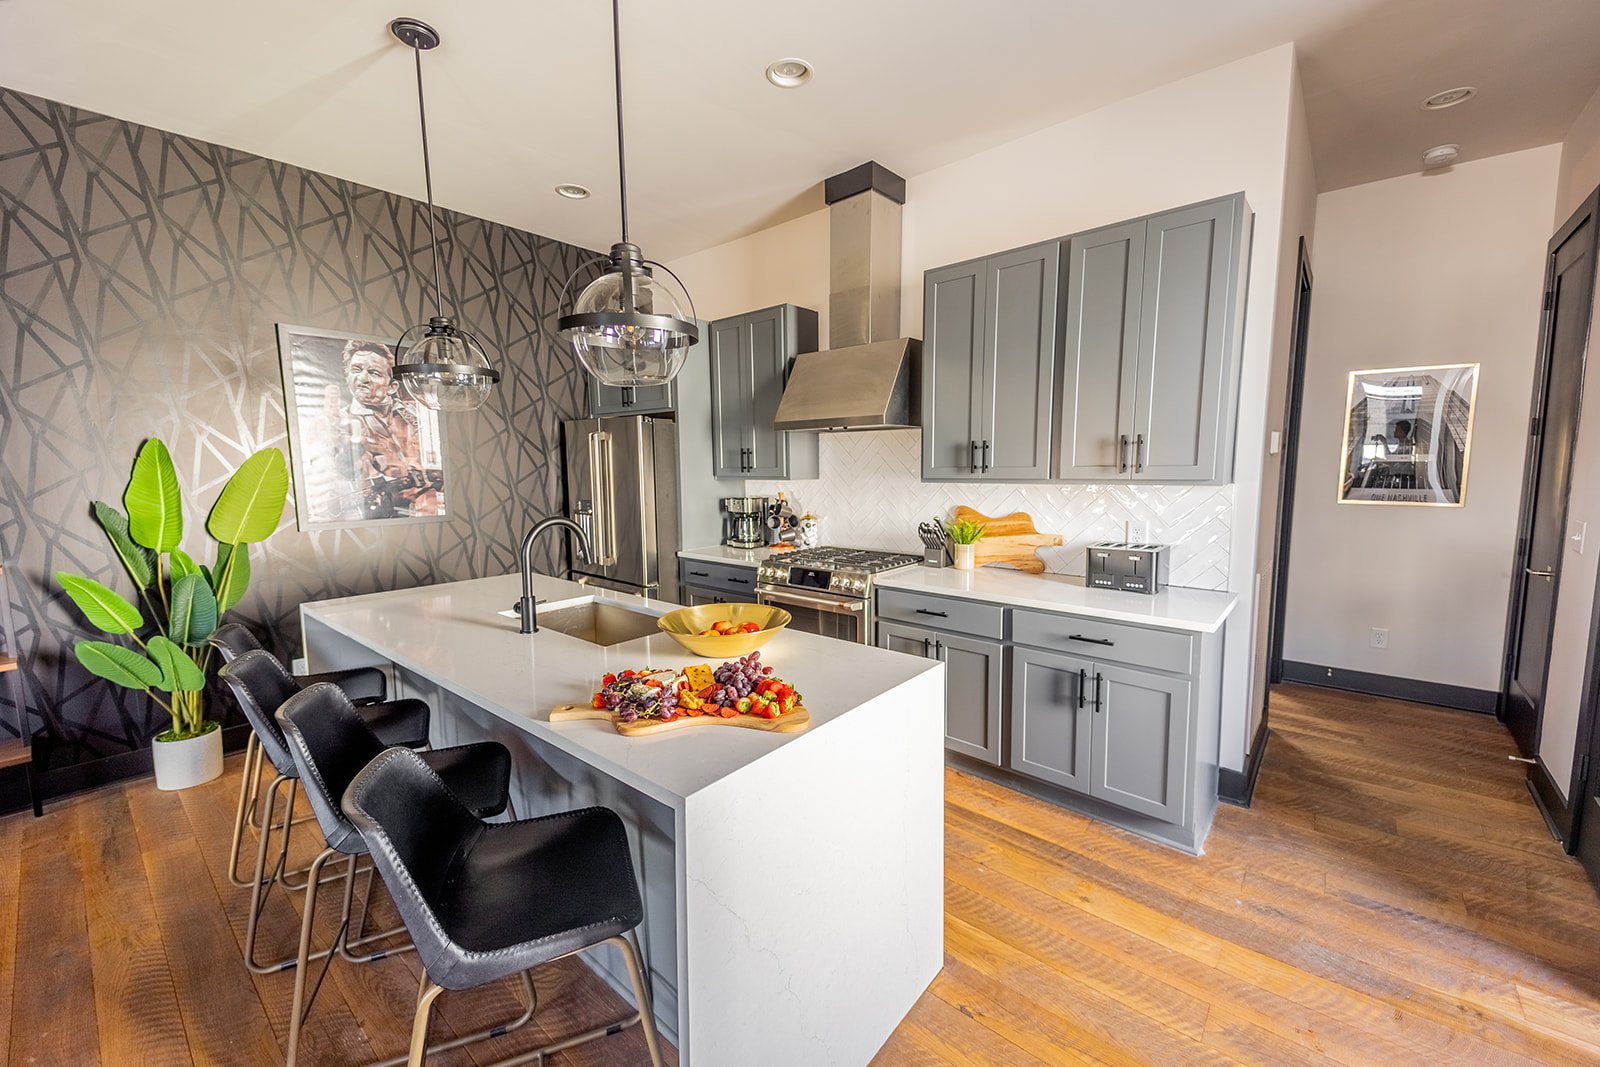 Bright open kitchen with professional stainless steel appliances and modern furnishes.